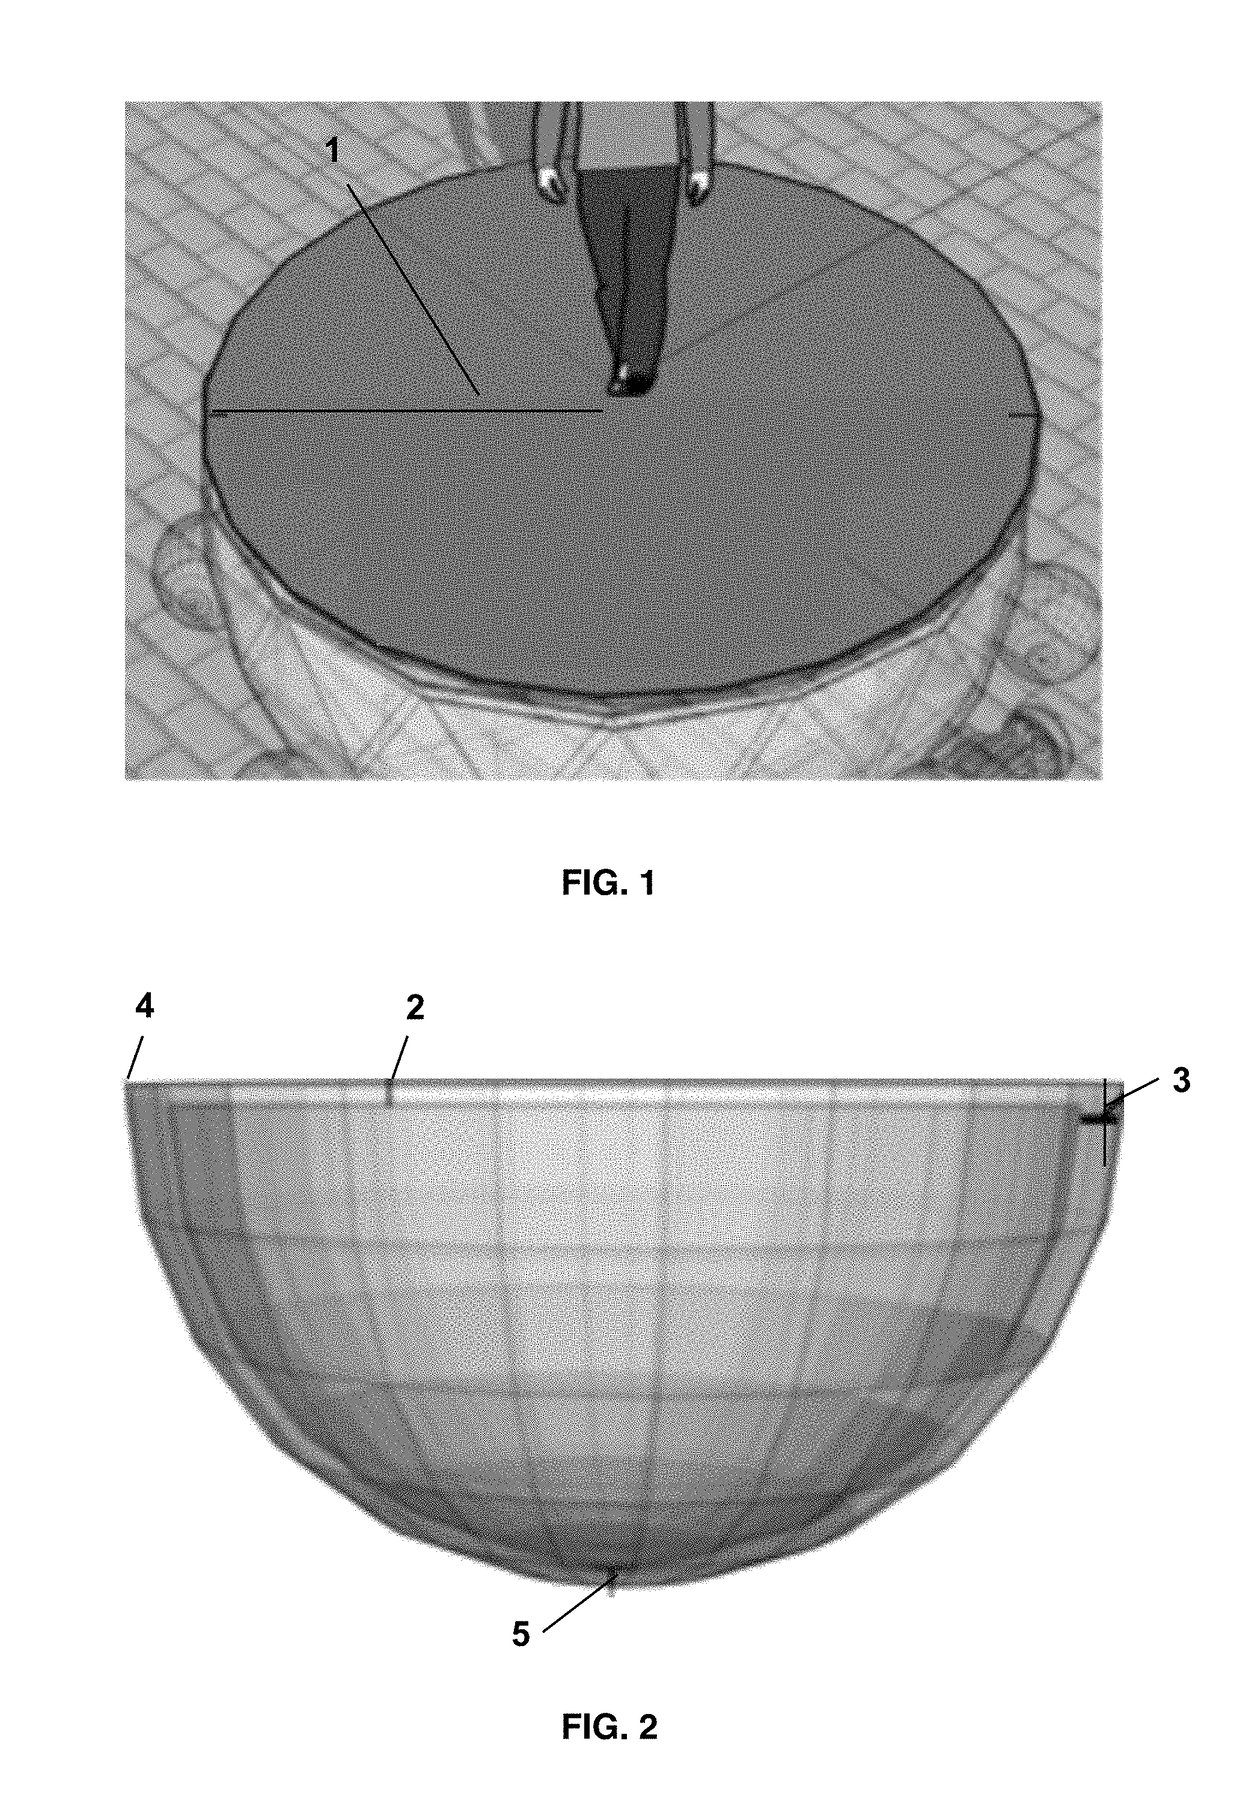 Moving Floor for Interactions with Virtual Reality Systems and Uses Thereof